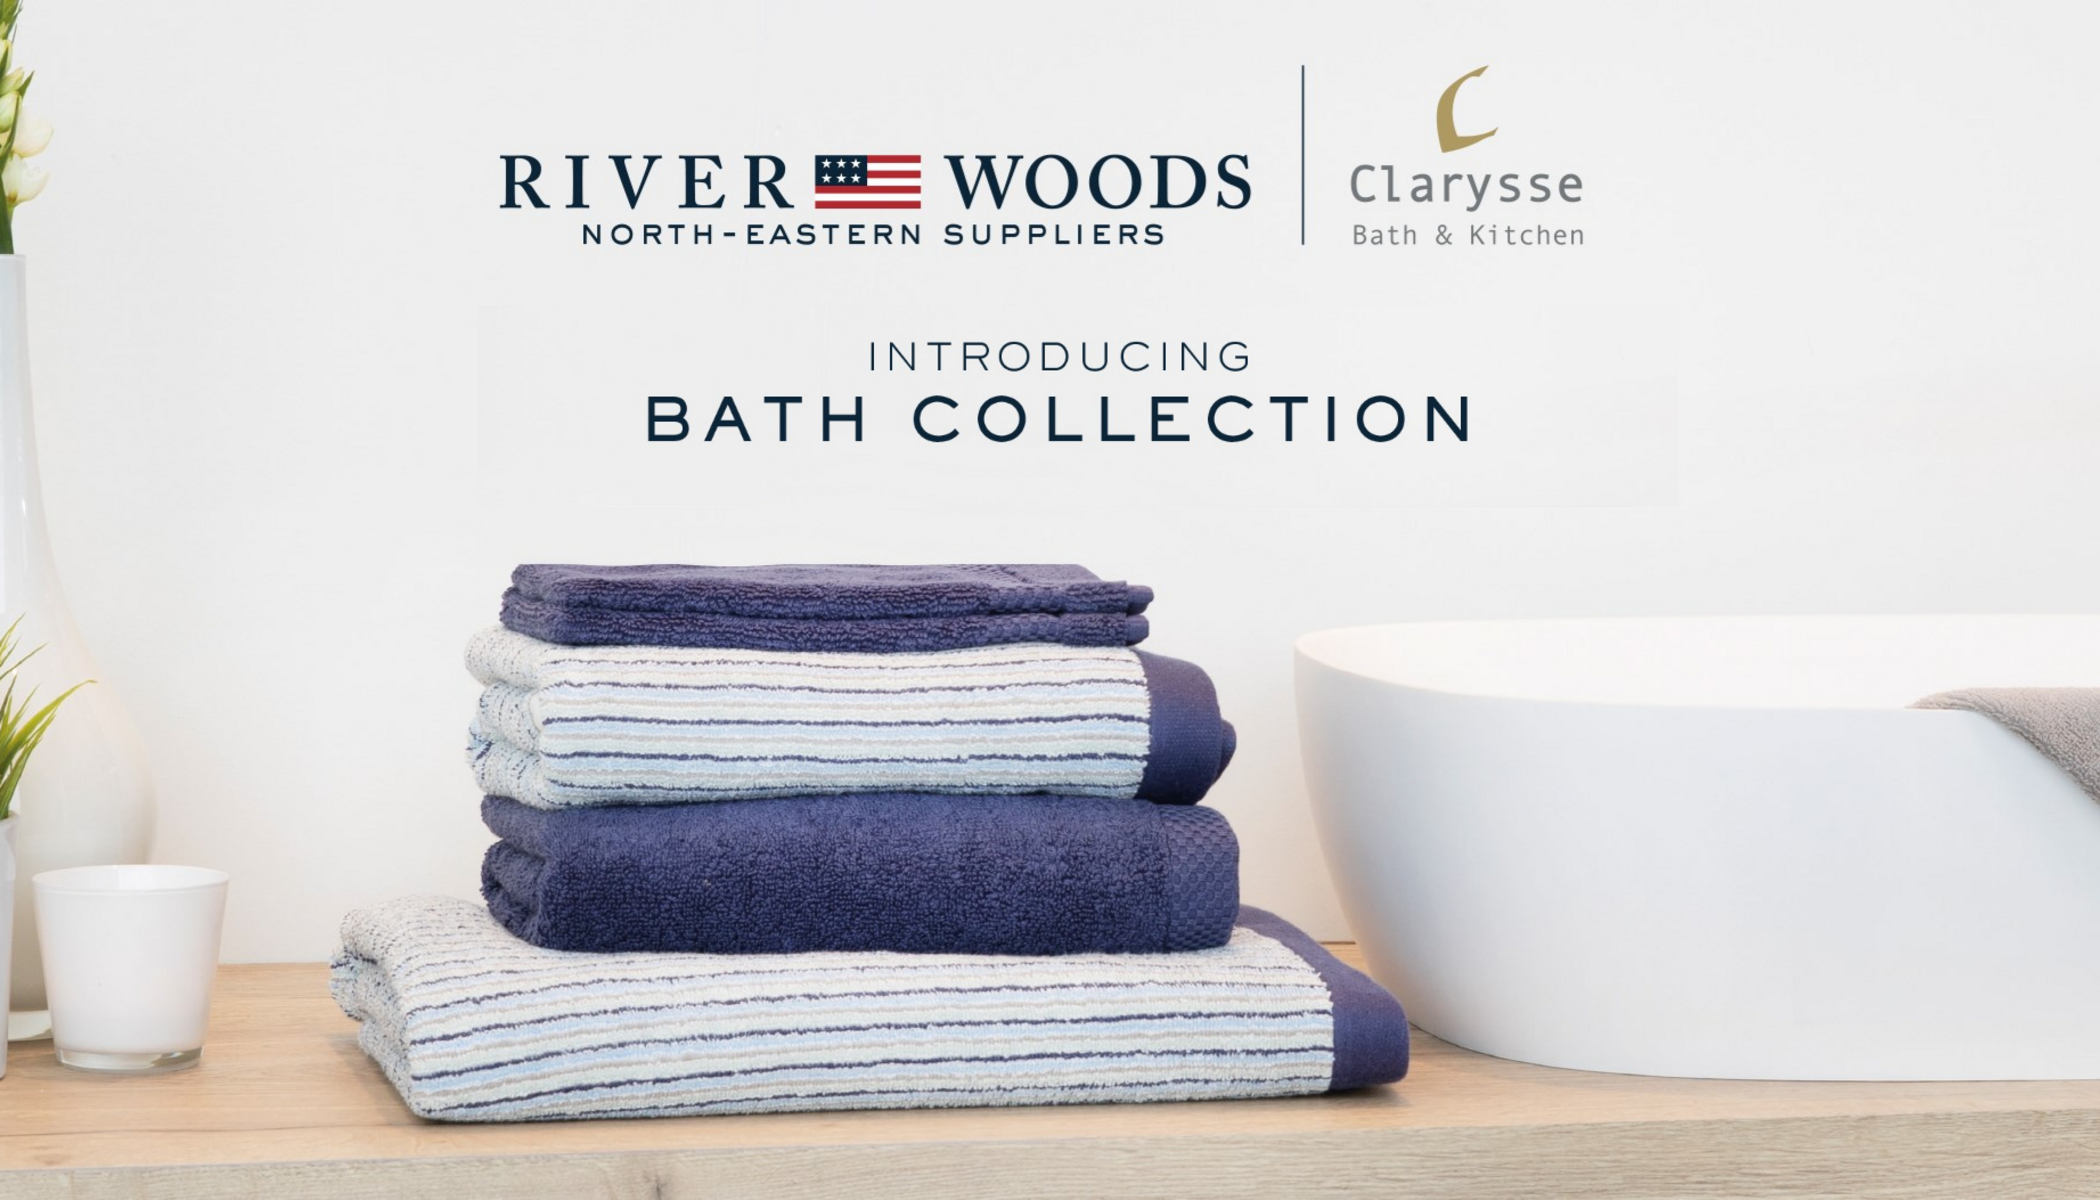 River Woods bath collection